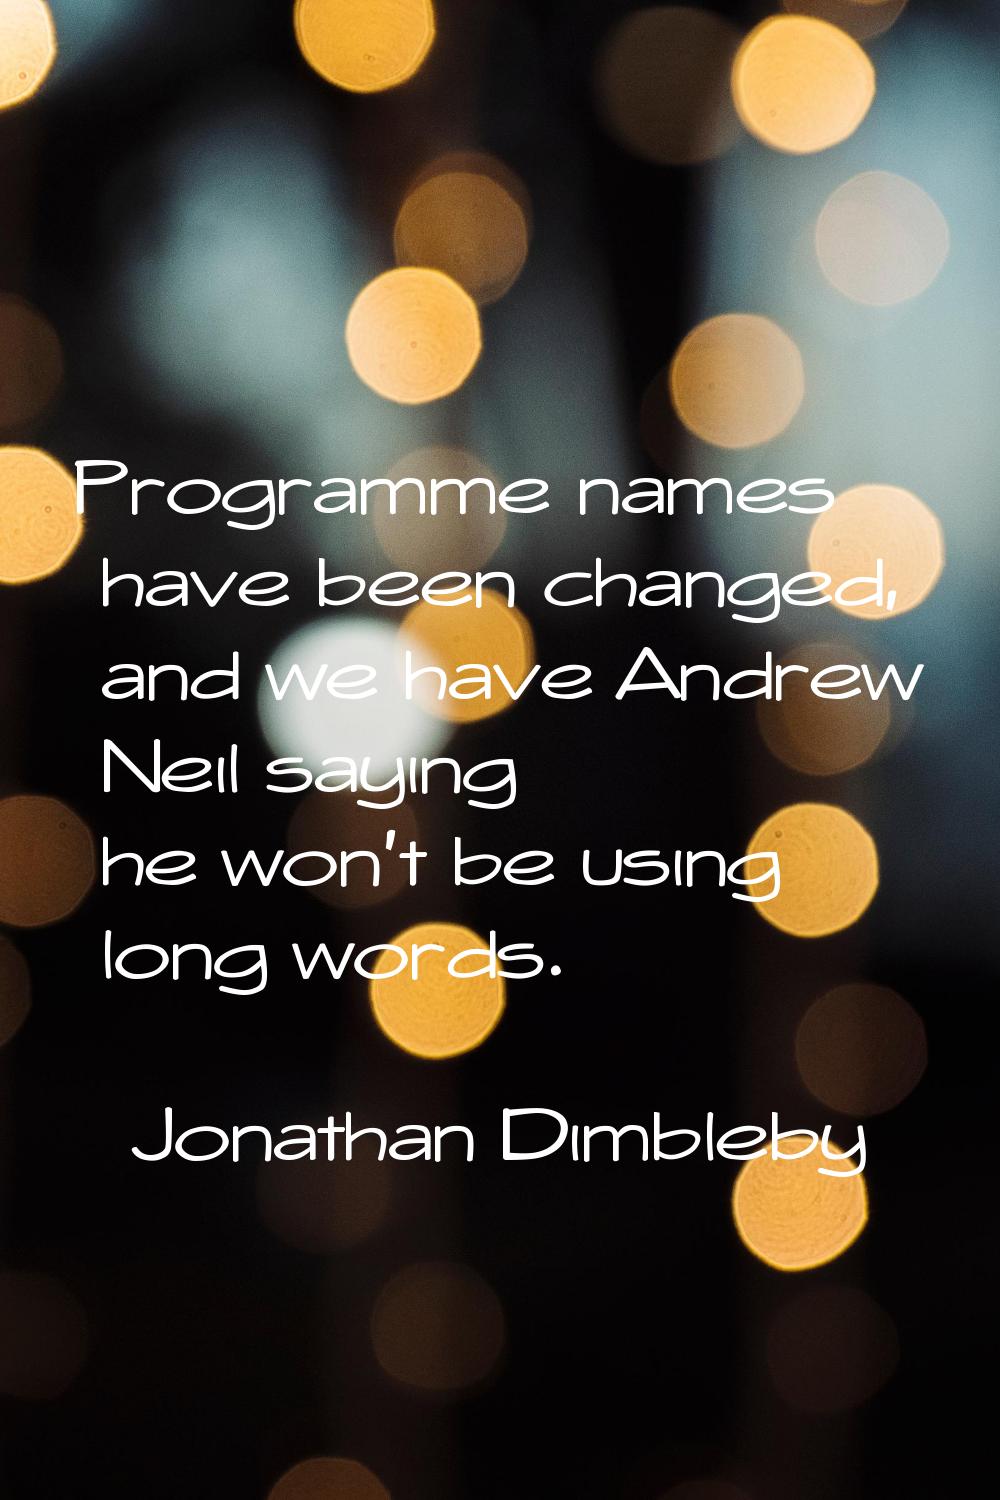 Programme names have been changed, and we have Andrew Neil saying he won't be using long words.